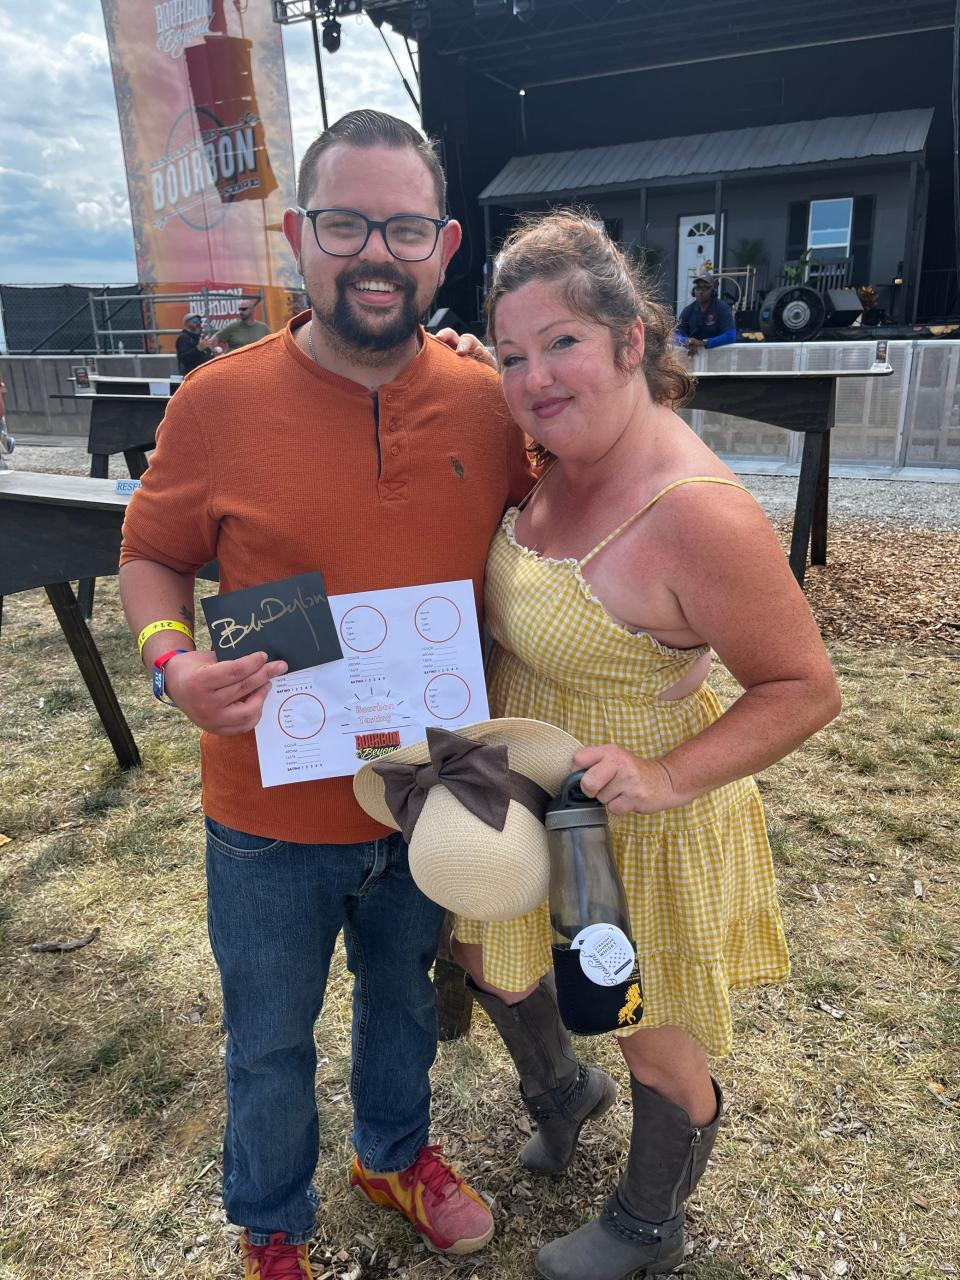 Curtis Brent, from Louisville, participated in the Heaven’s Door Barrel Select program at Saturday's Bourbon & Beyond festival. He came with his fiancé (and designated driver, as she said) Jamie Reynolds.